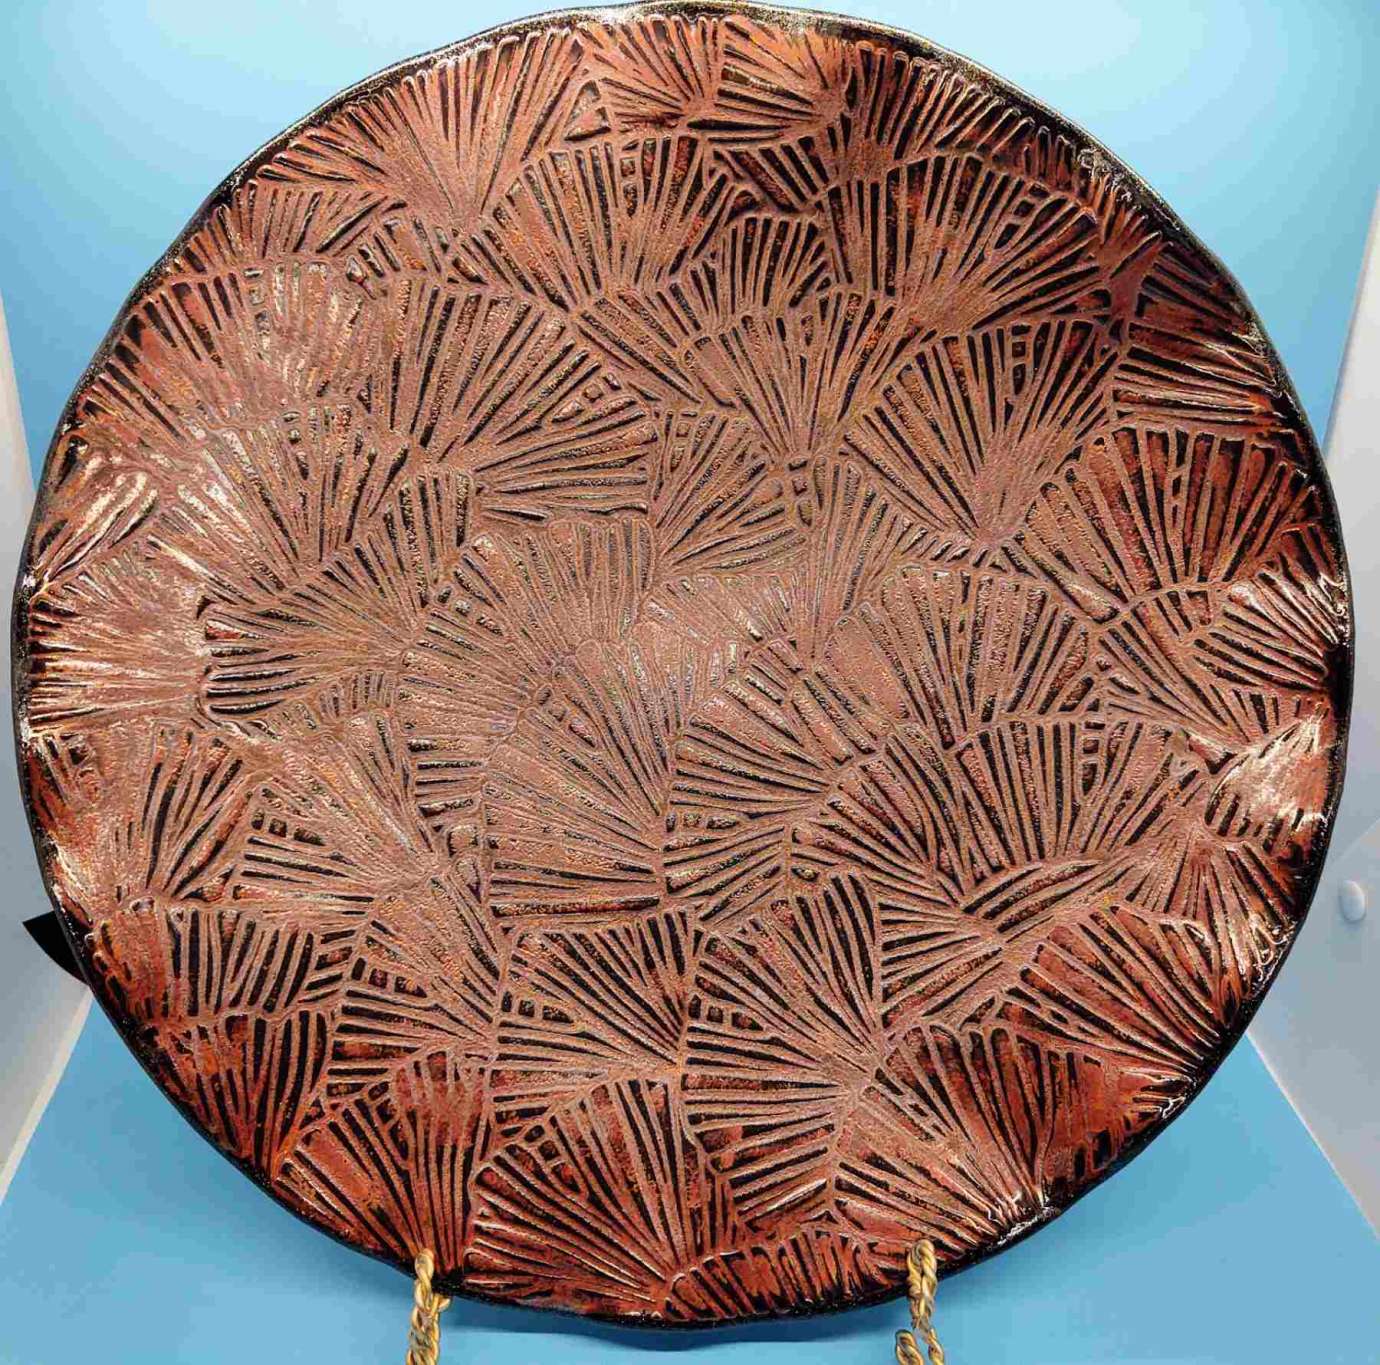 A rust colored ceramic patterned plate